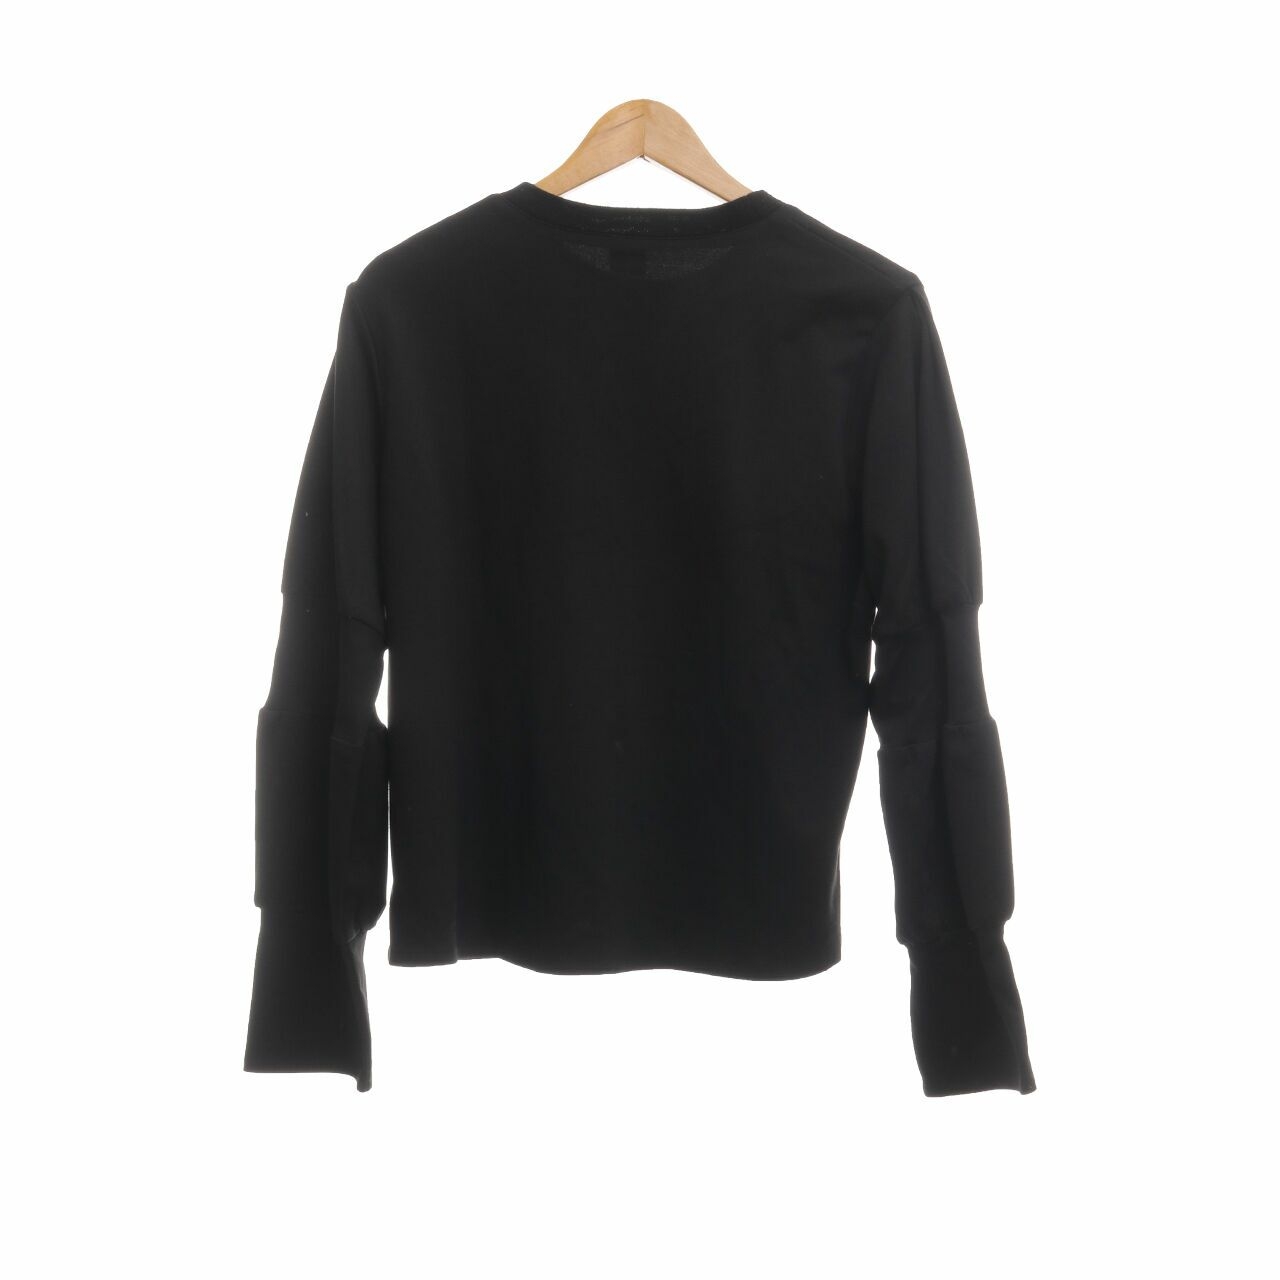 Day by Love And flair Black Sweater